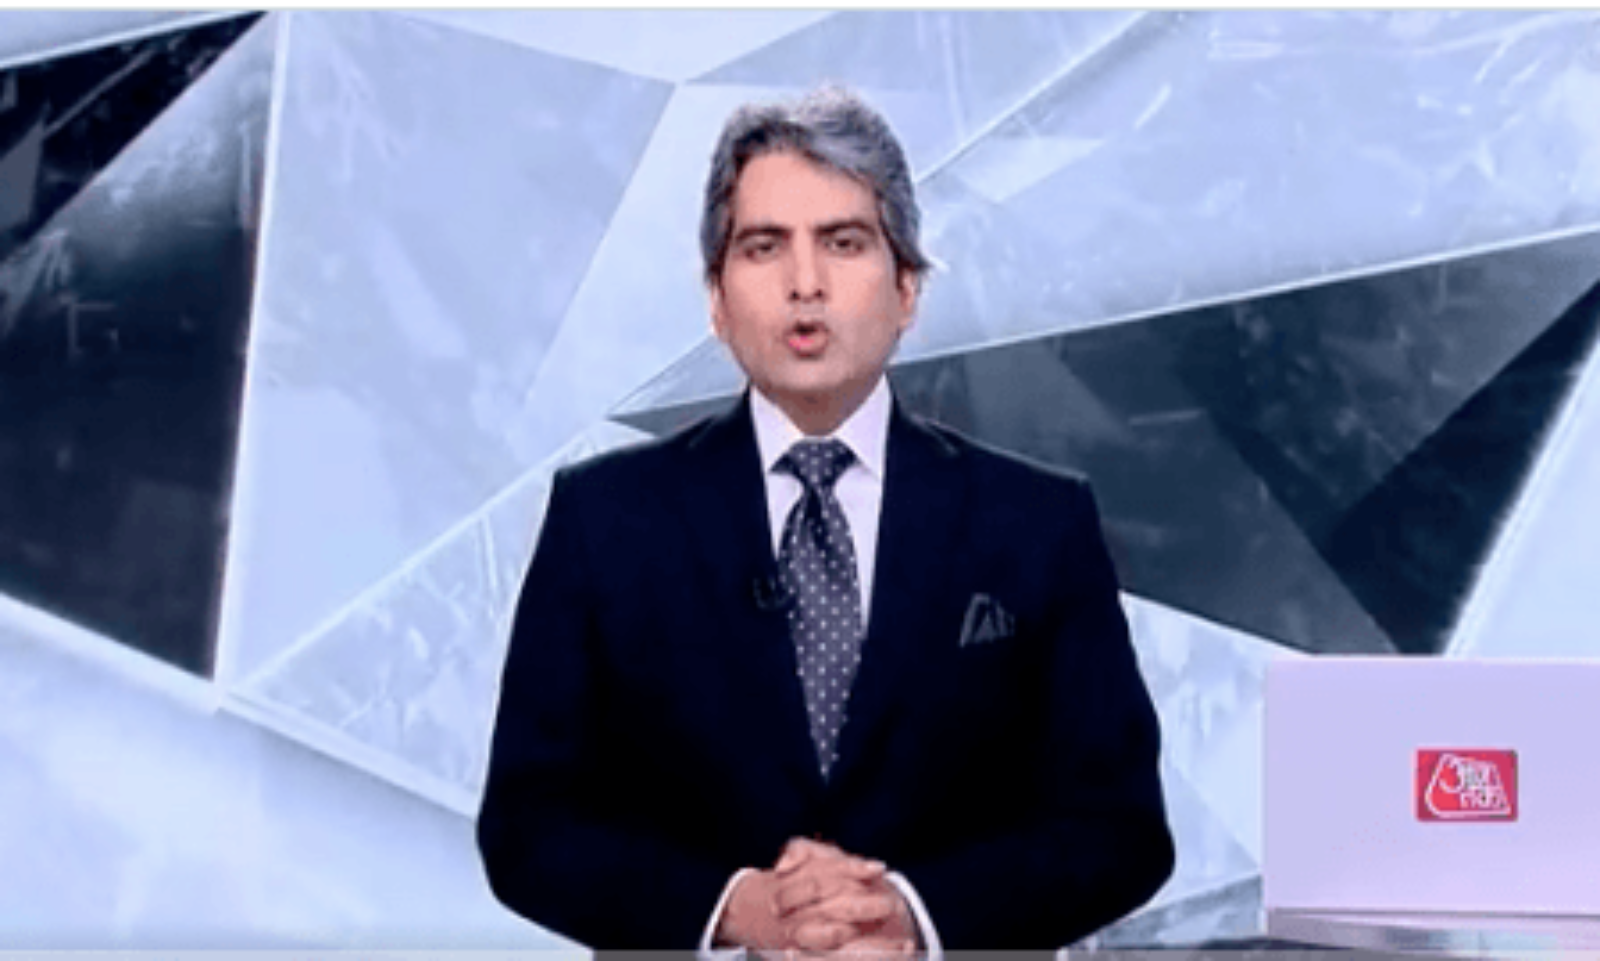 Chaudhary Triple X Videos - Karnataka High Court Gives Interim Protection To Sudhir Chaudhary But Says  His Report Could Create Hatred Against Minorities